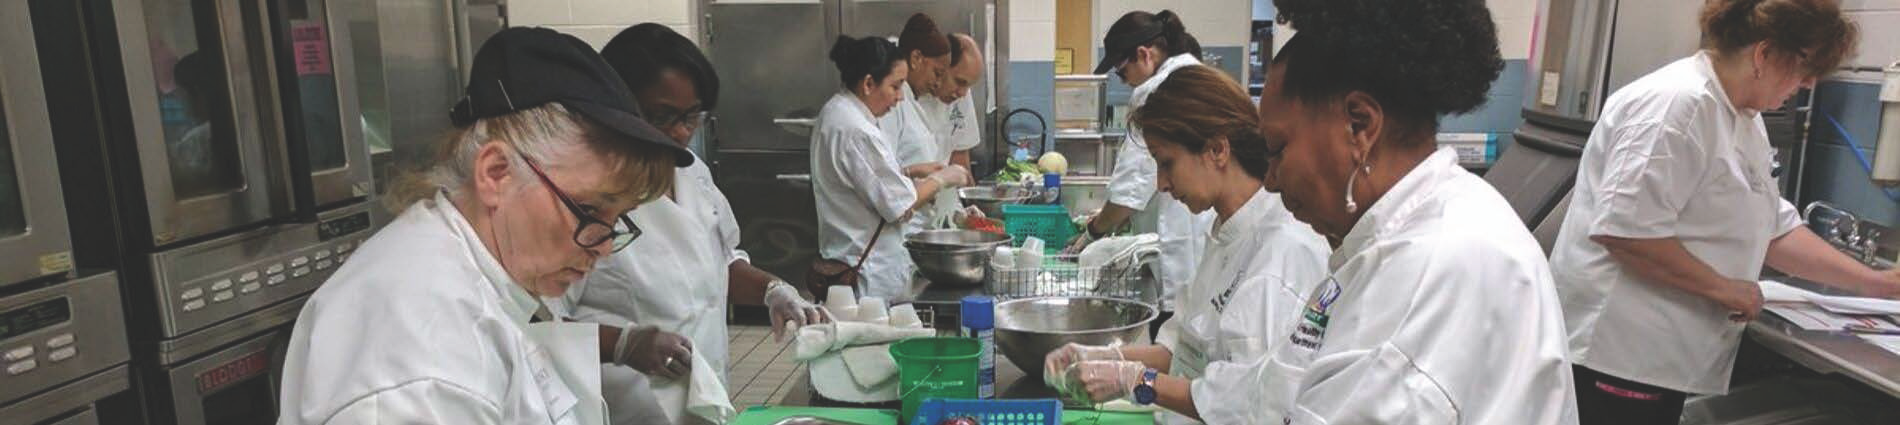 School chefs being trained